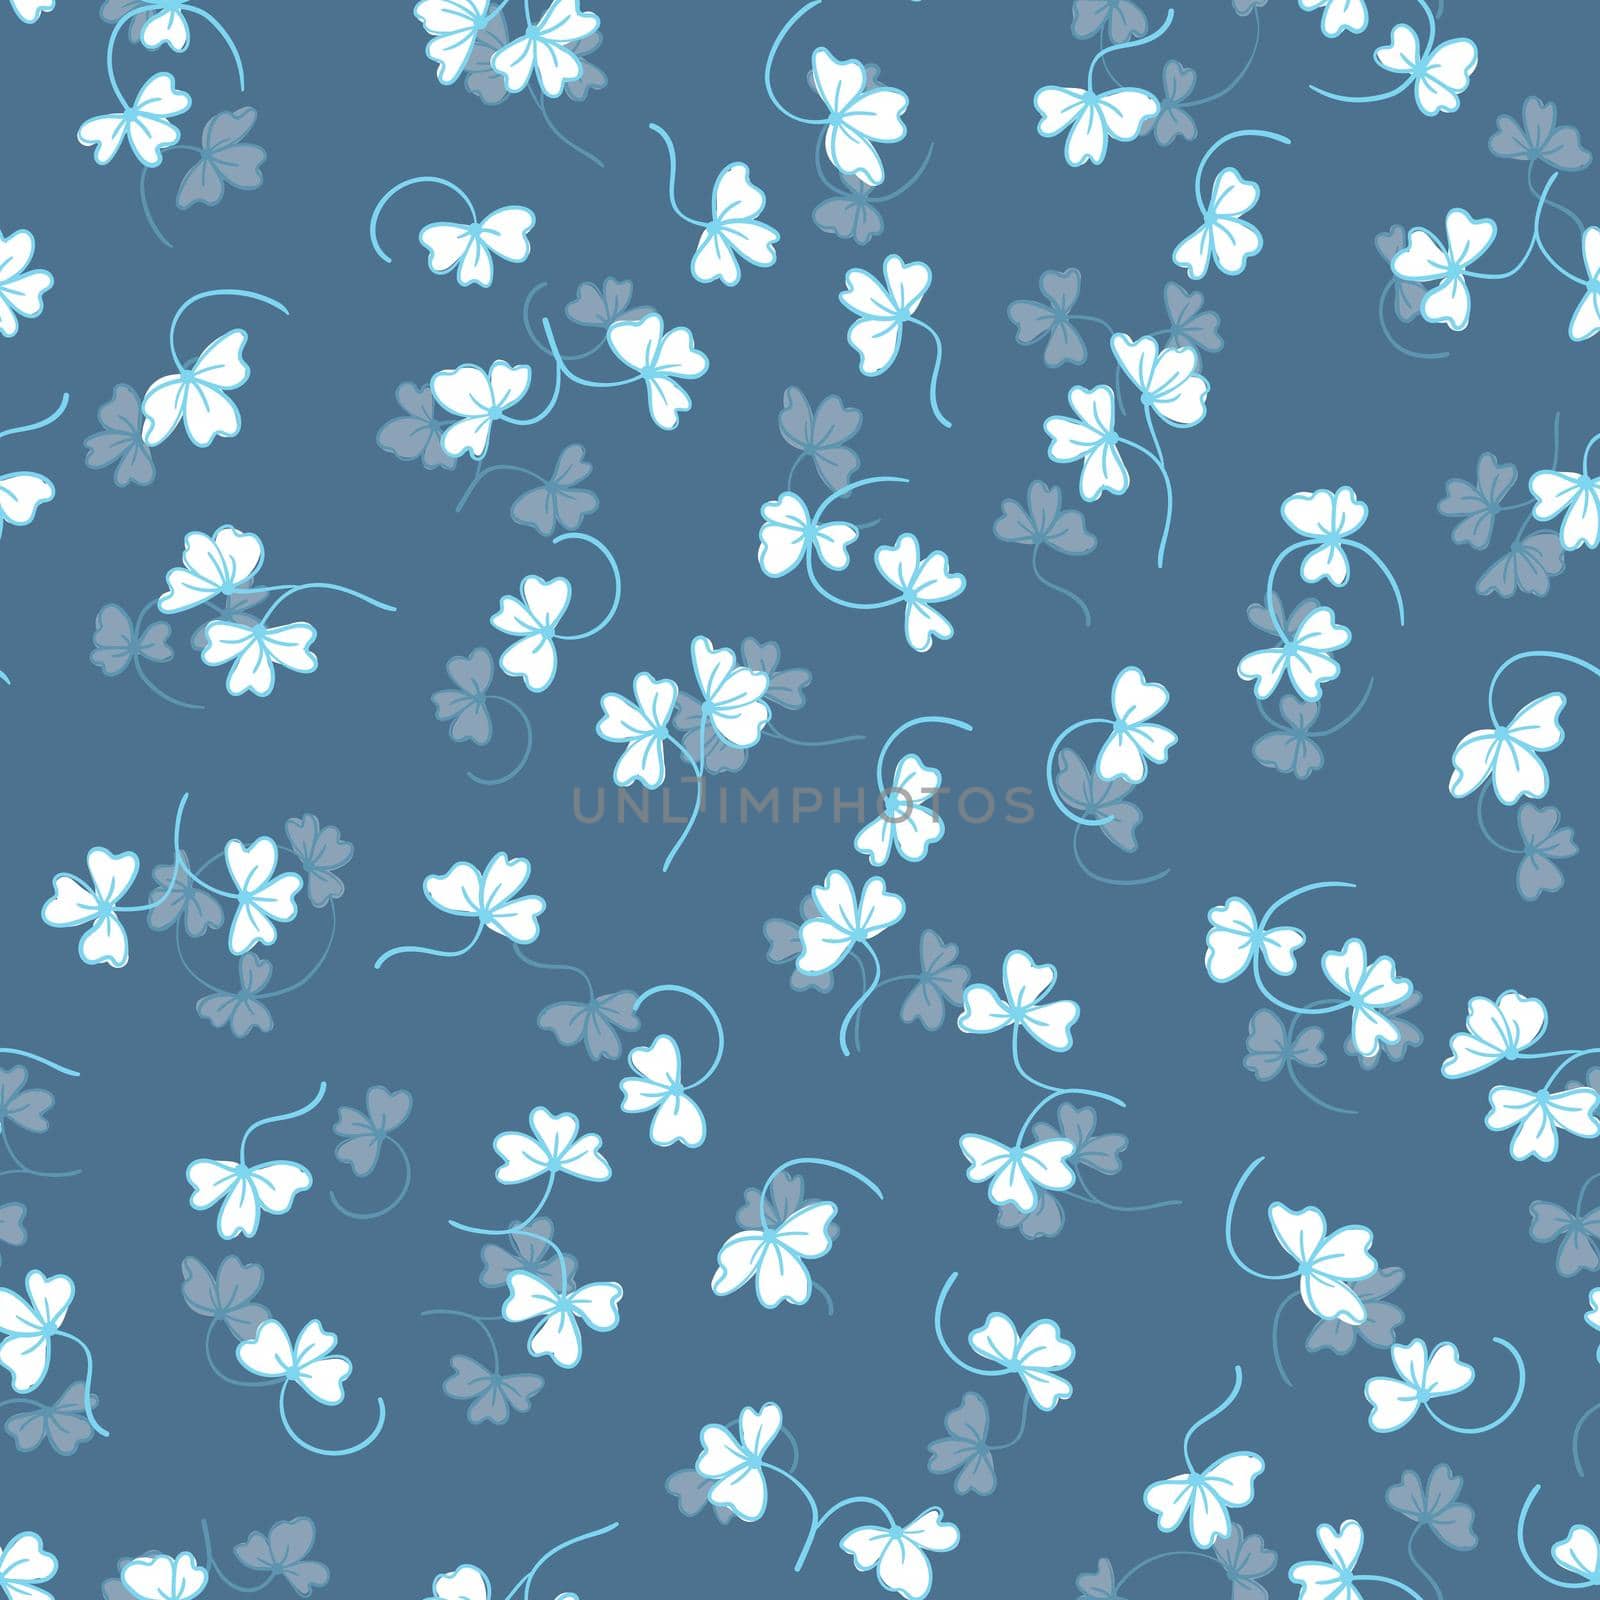 Trendy seamless floral pattern with ornament. Colorful flowers on blue background. Simple minimalistic pattern with nature elements. Vector illustration for fabric, textile, poster, invitation